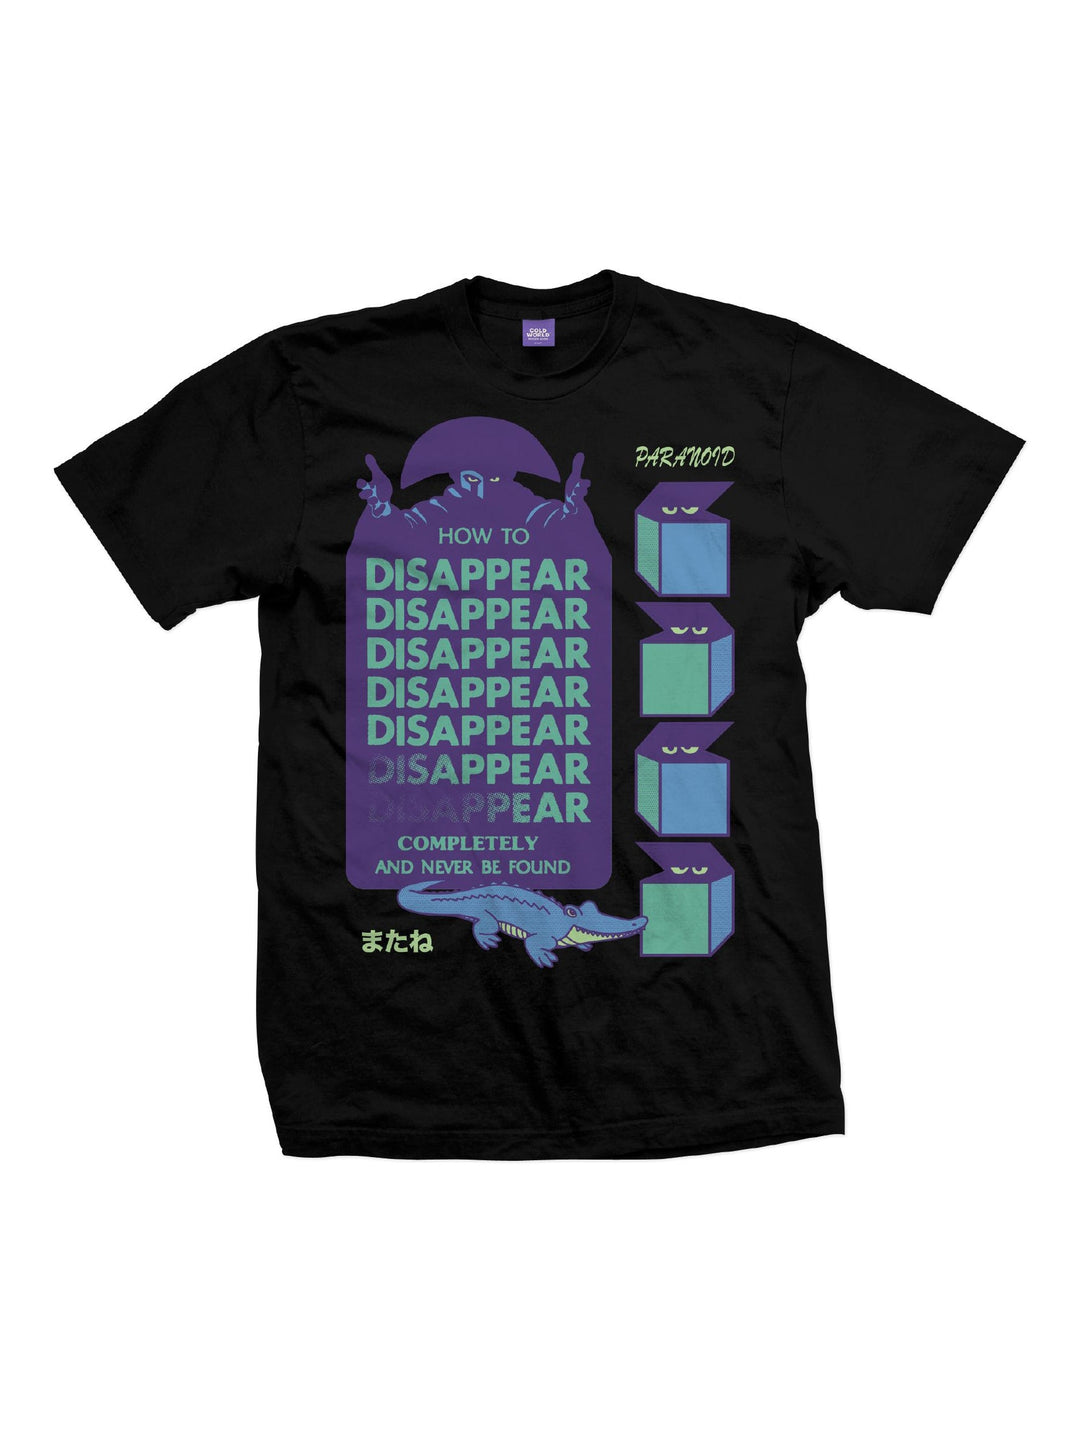 Cold World Disappearing Tee